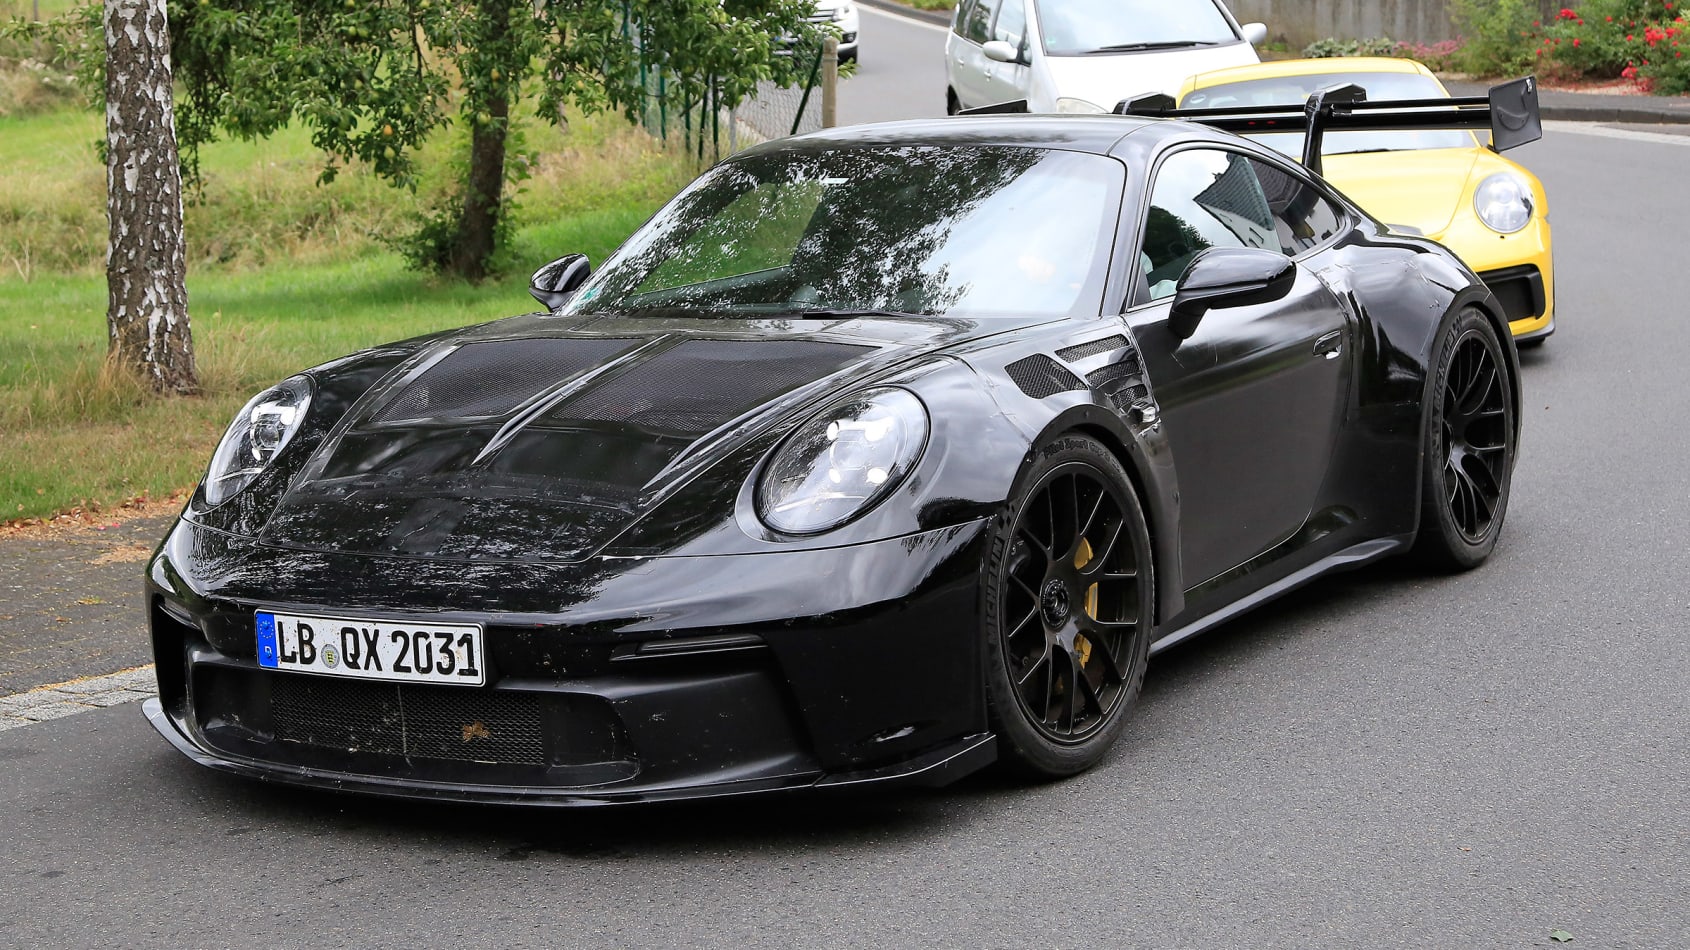 New 992 Porsche 911 GT3 RS spied for the first time - pictures | evo